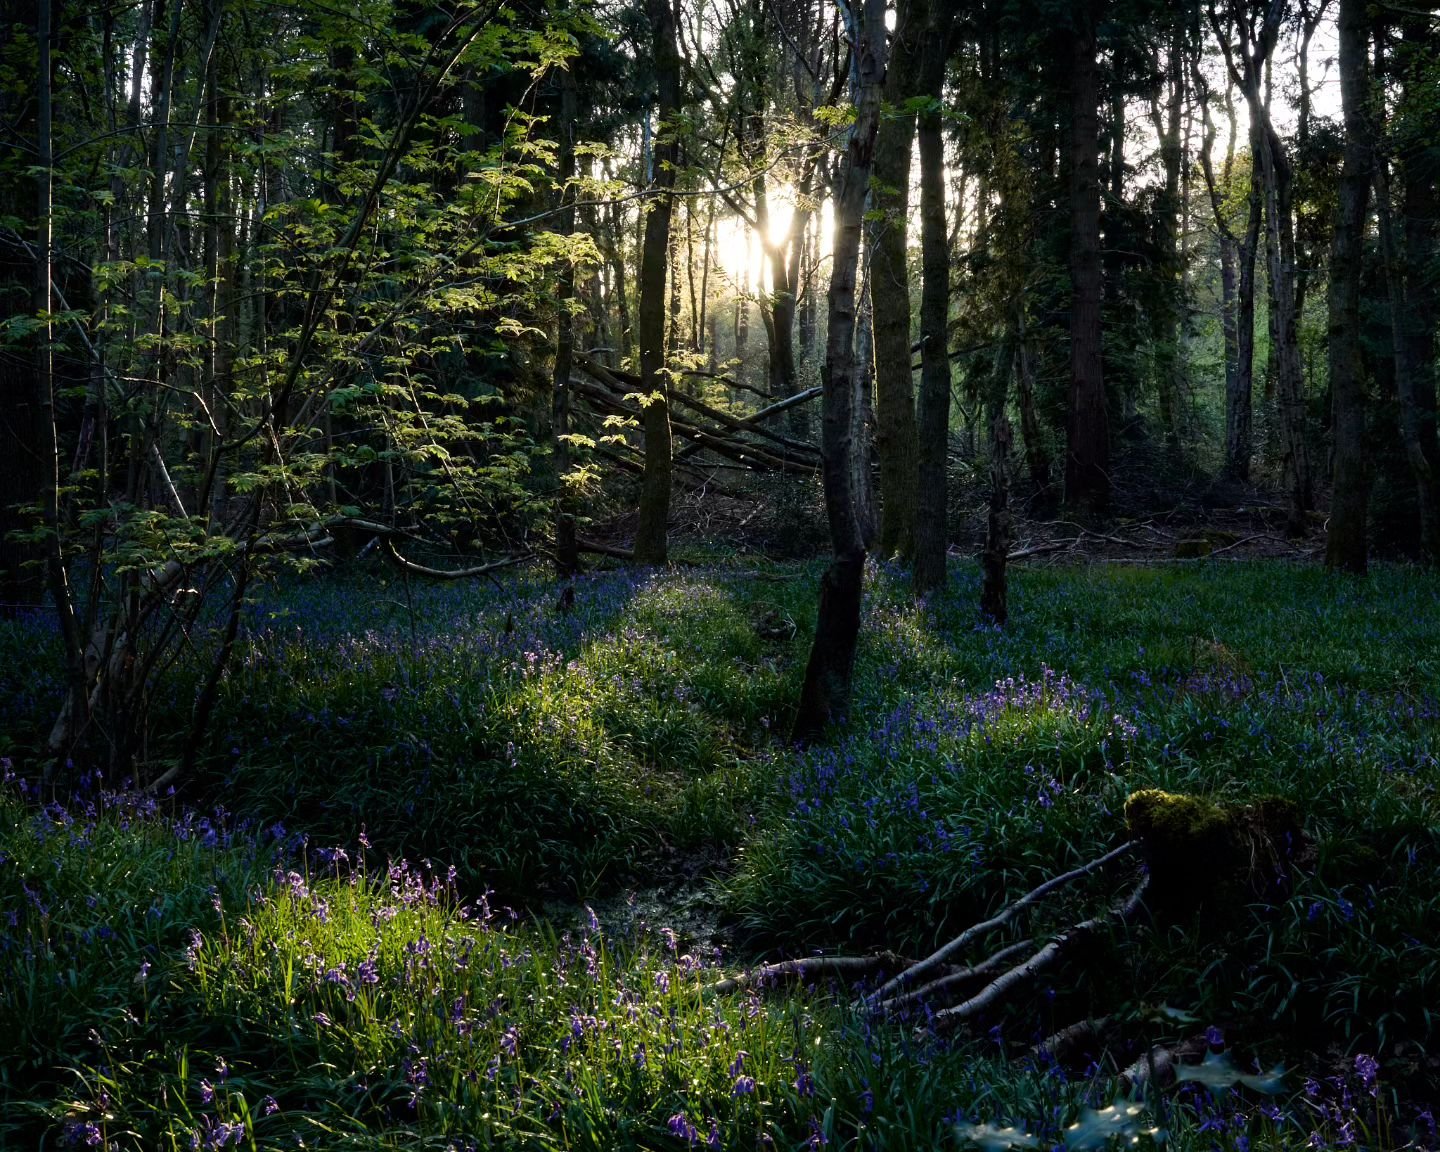 And one from this year.

#uklandscape #allkindsoftrees #fairyforest &nbsp;#earth_shotz  #bluebells #tree_captures #fairyforest #hugs_for_trees #instaflowers #flowersofinstagram  #yourcountryside #uklandscape #moody_captures #ethereal_moods #tree_magi